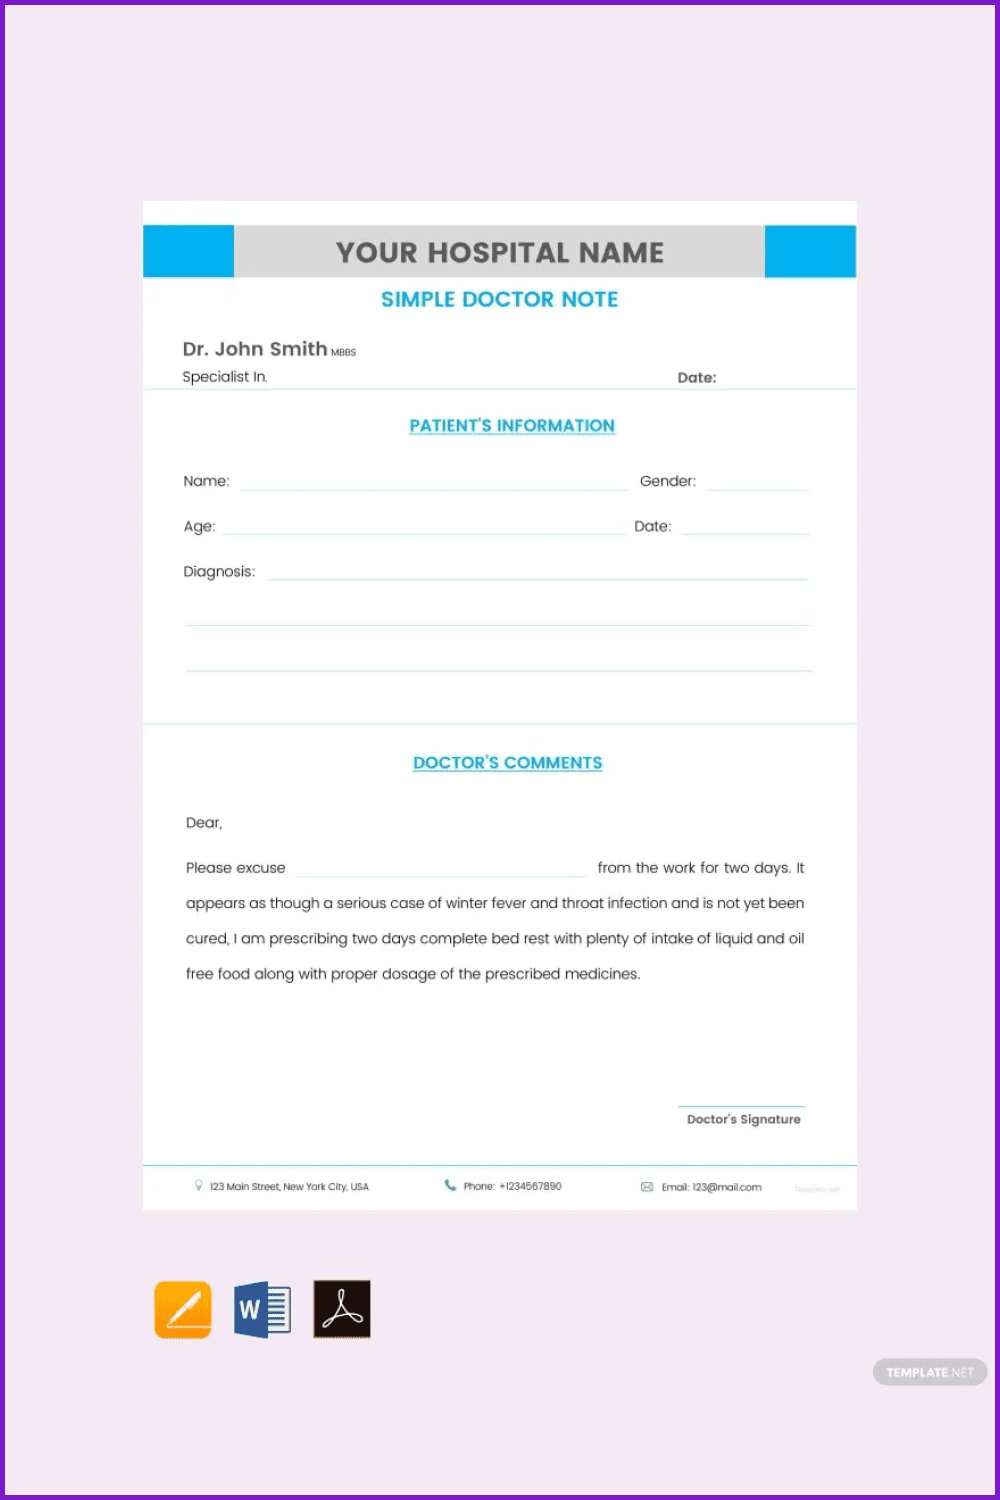 Simple Doctor Note Template.